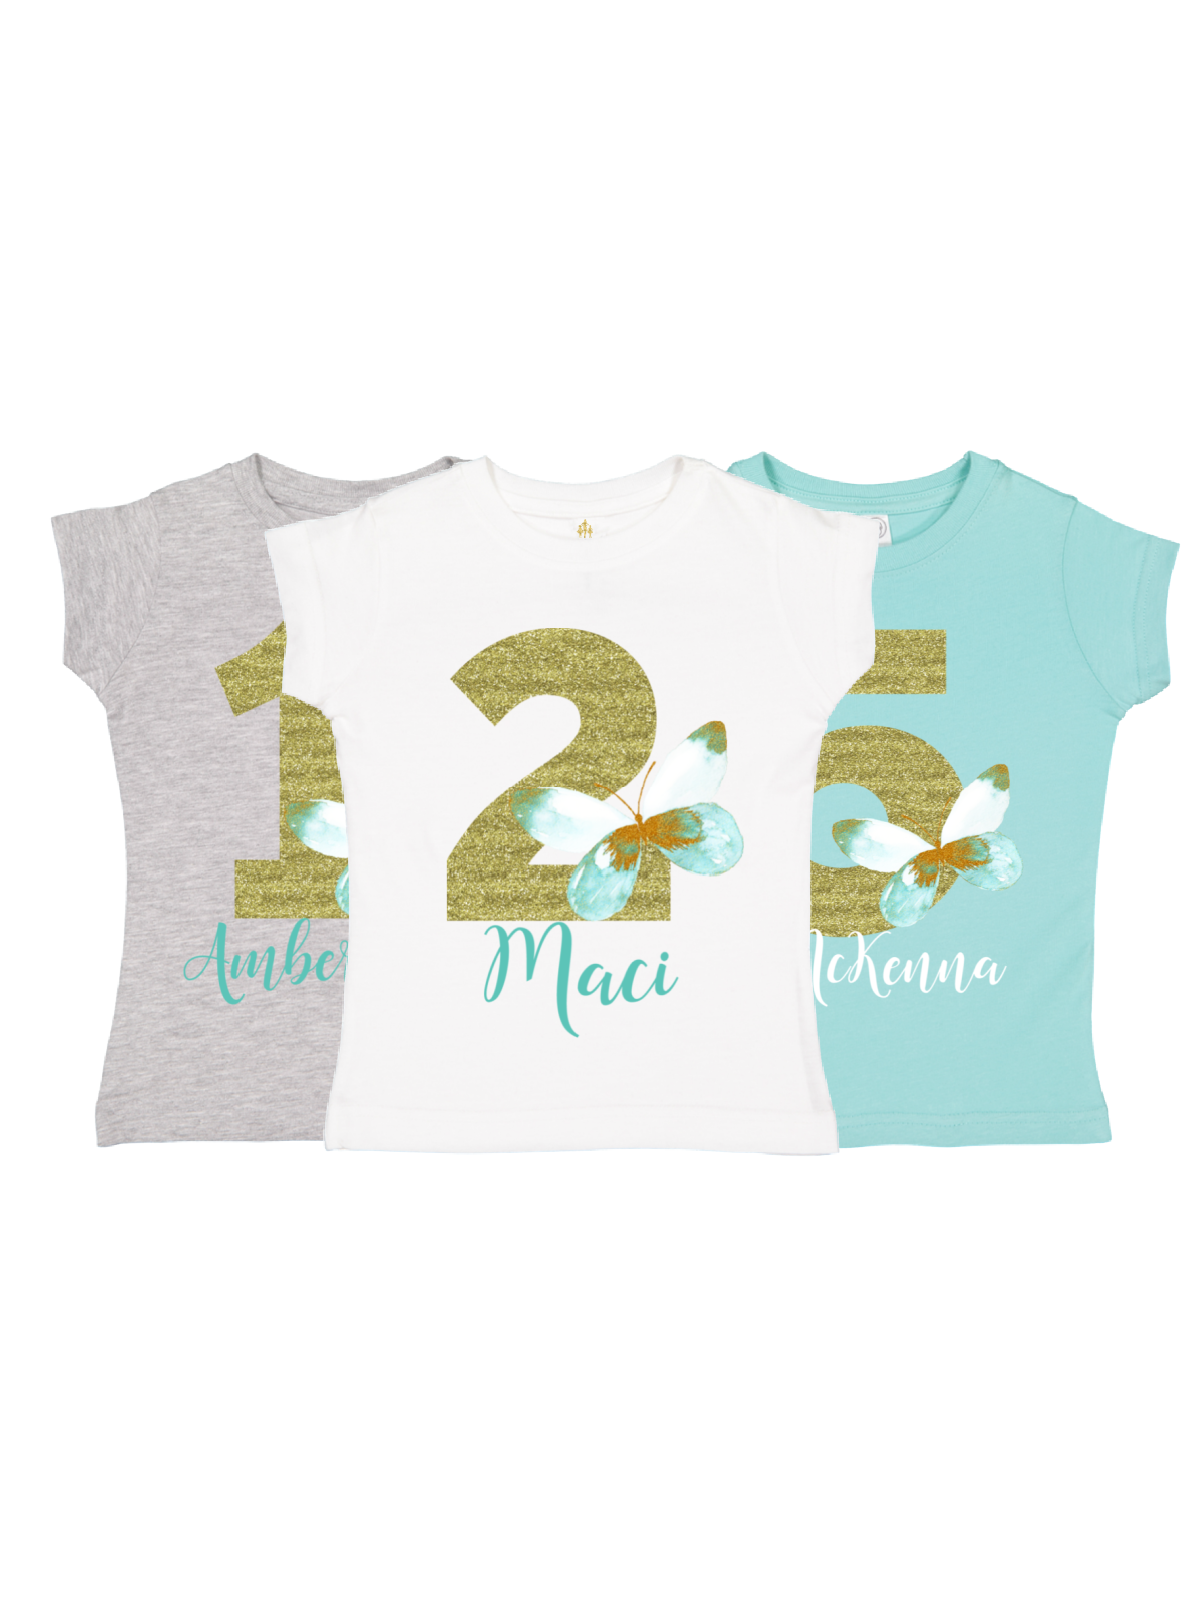 white, blue, and gray girls green butterfly shirt